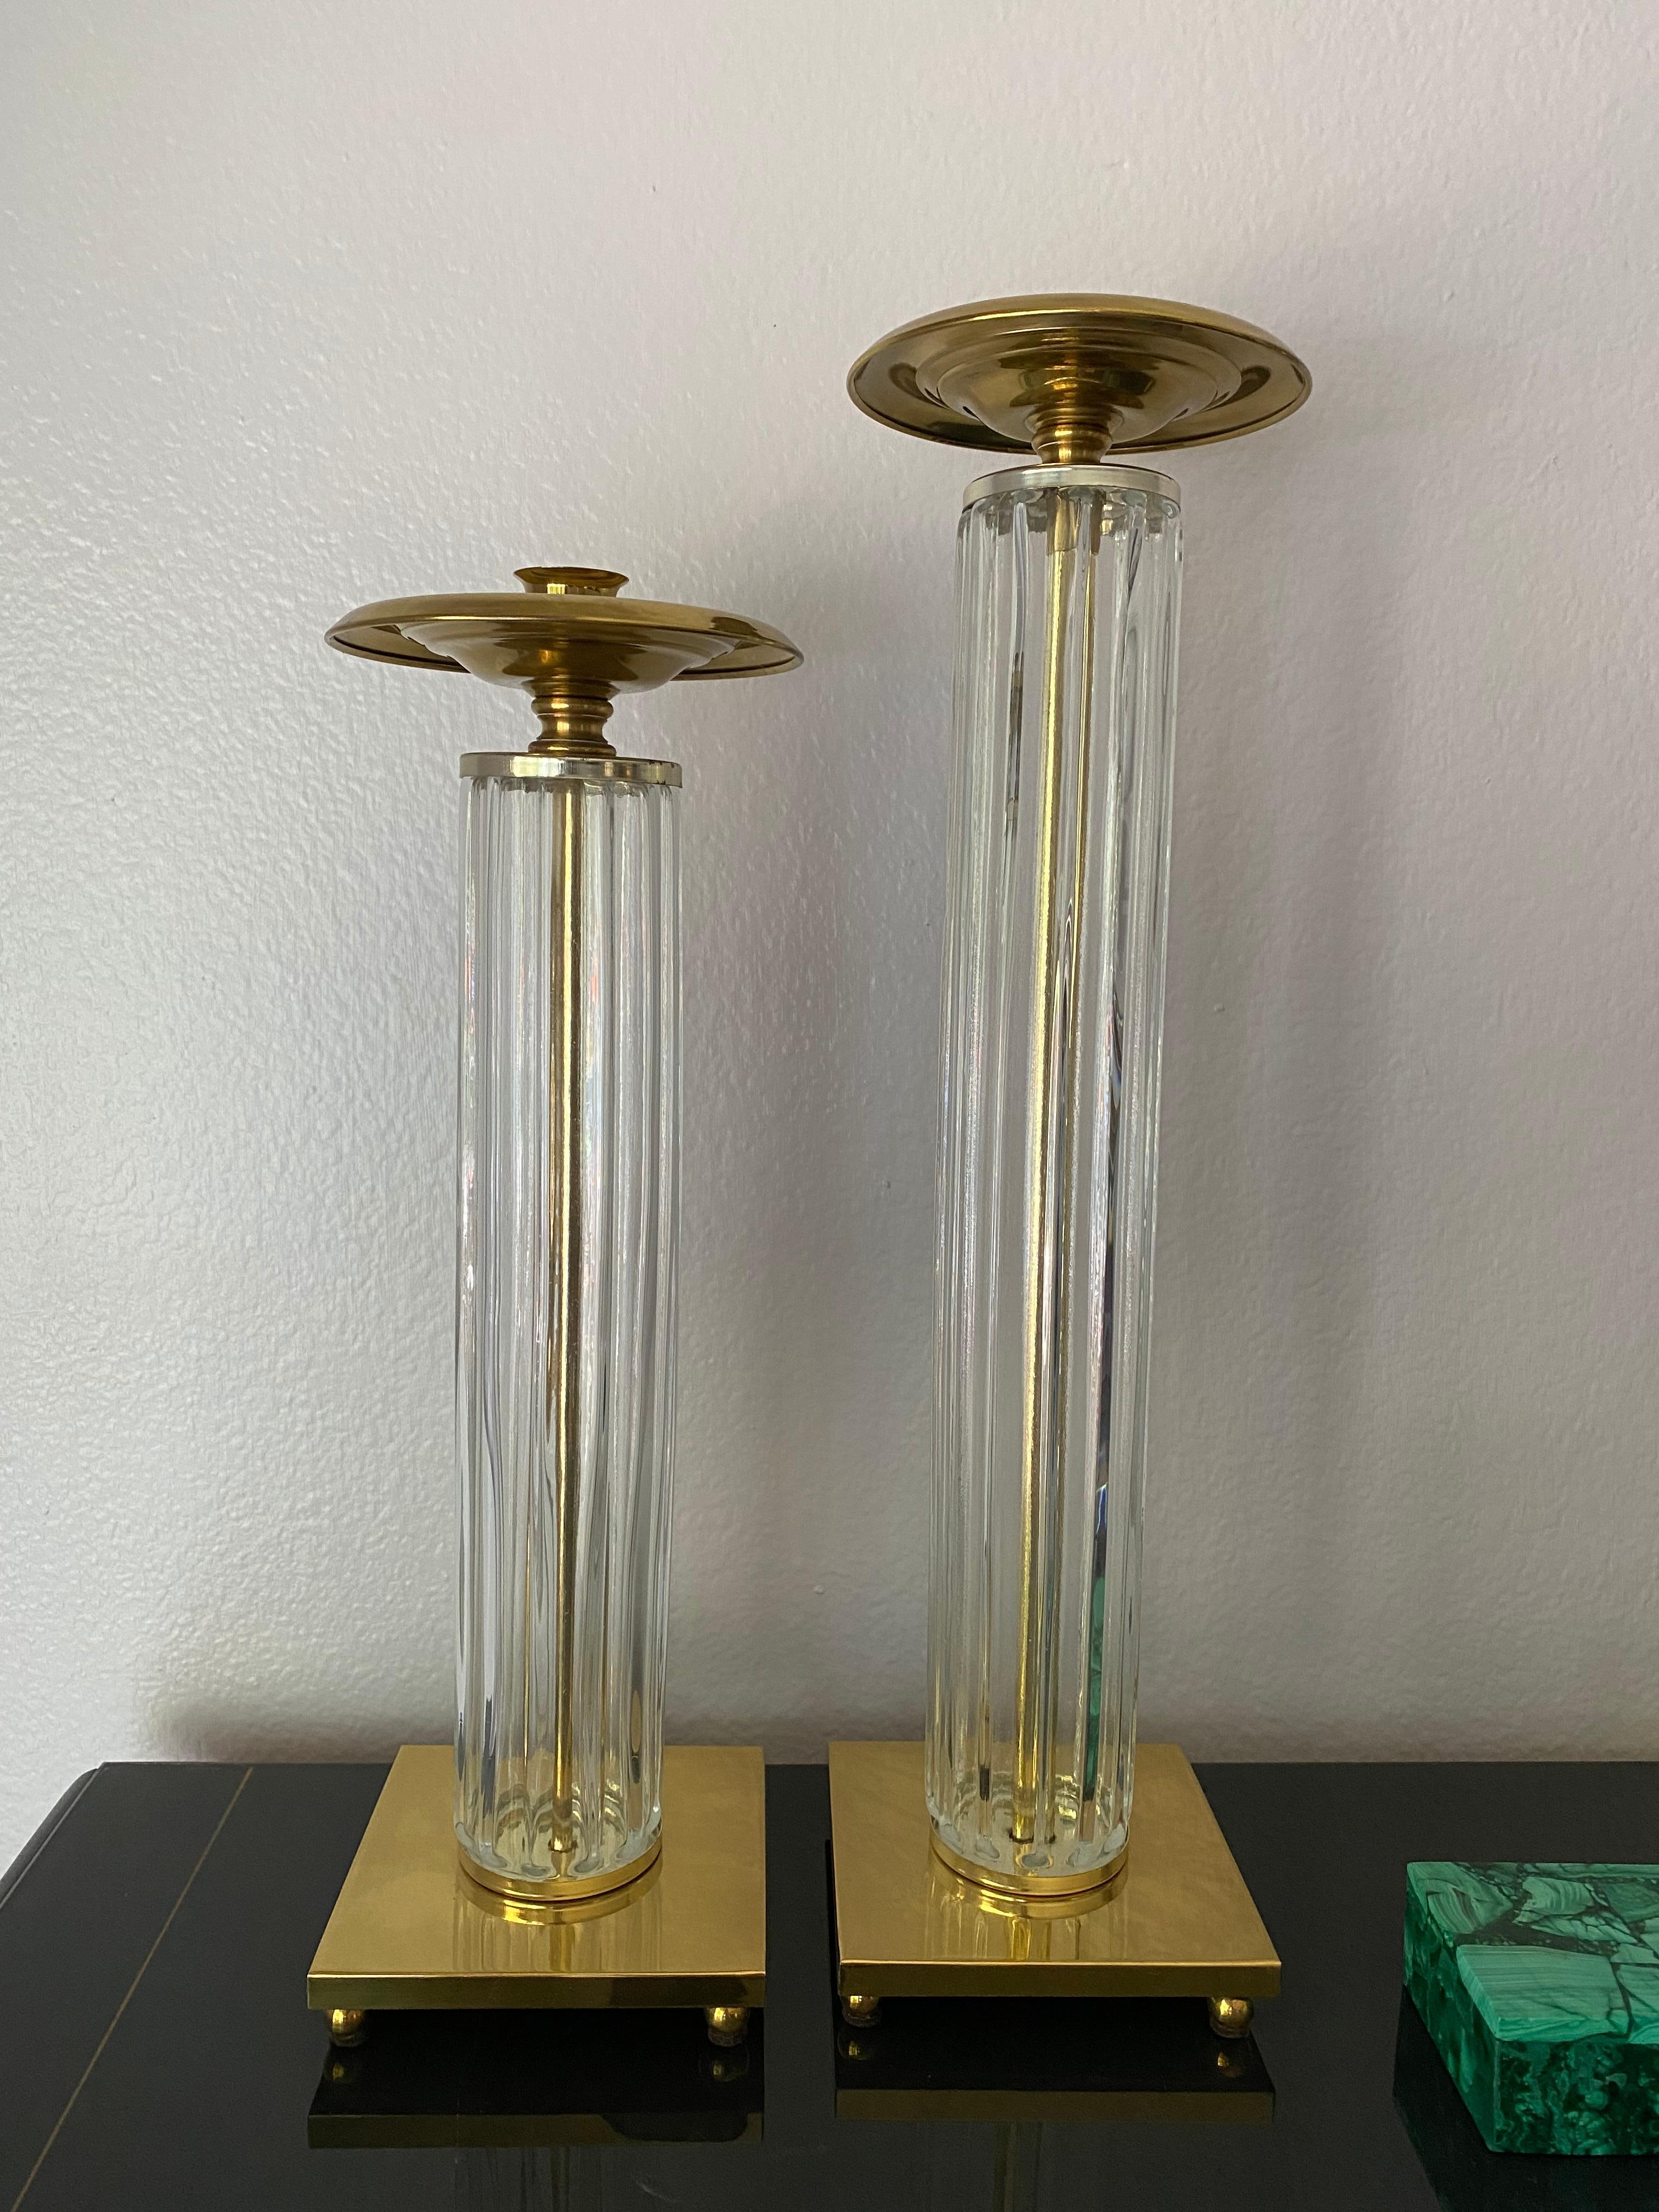 Pair of brass and cast glass candleholders. One is 15